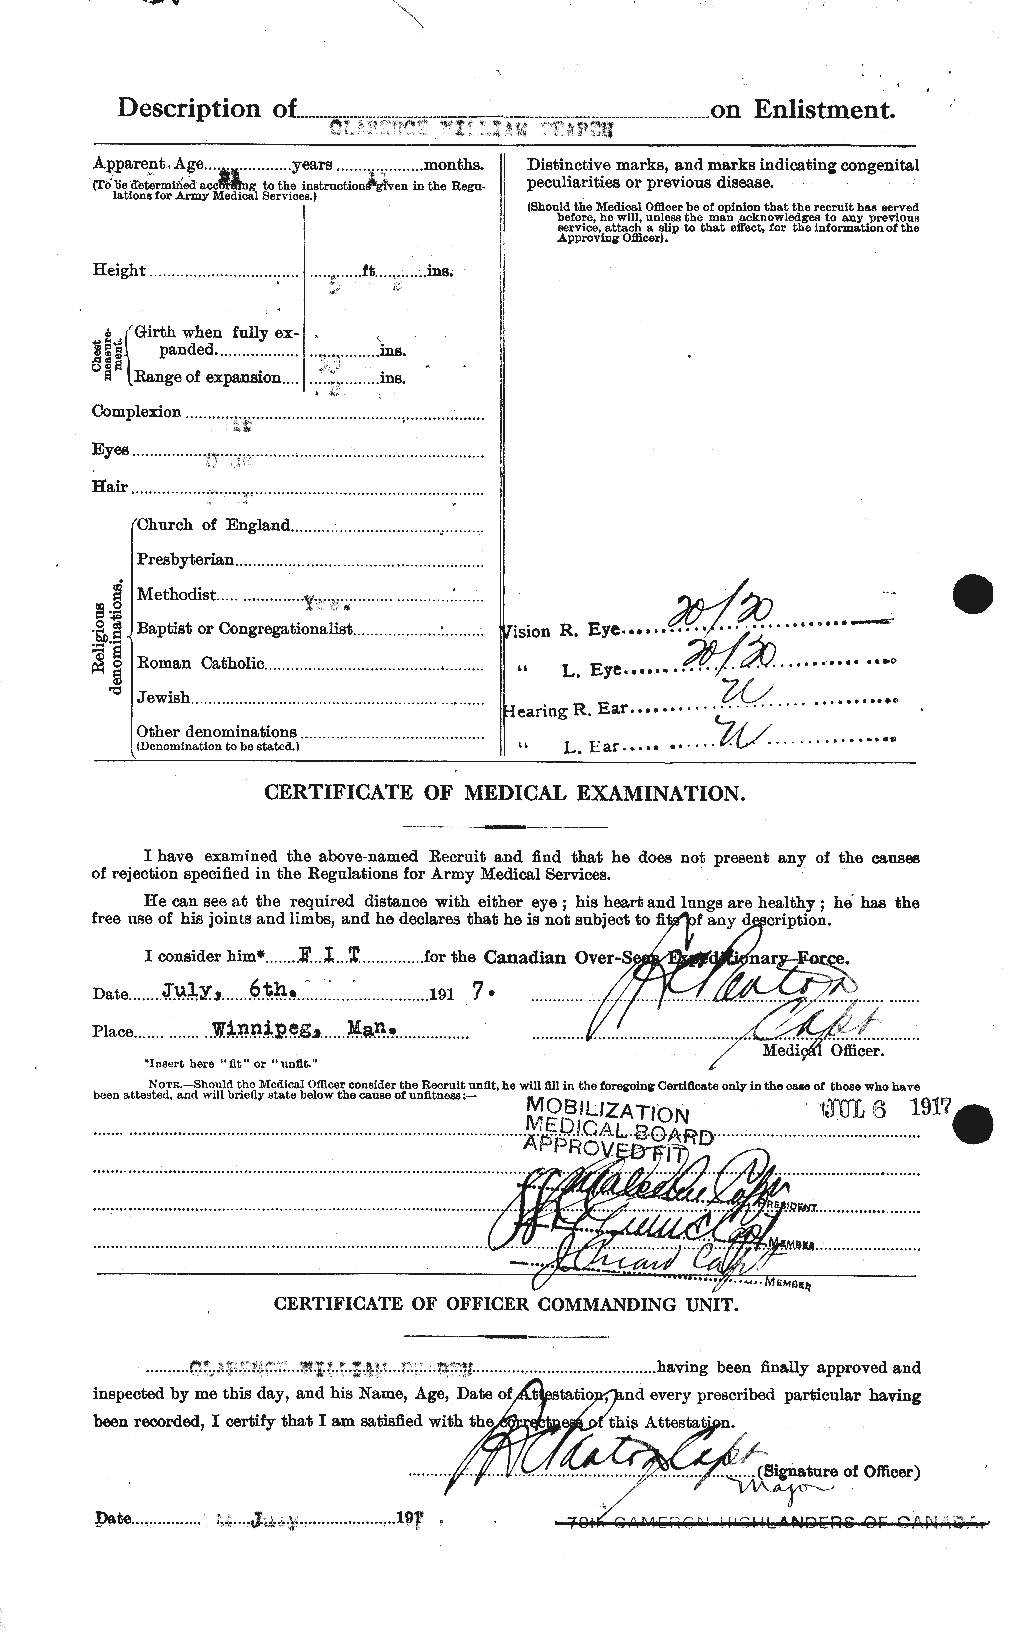 Personnel Records of the First World War - CEF 571432b